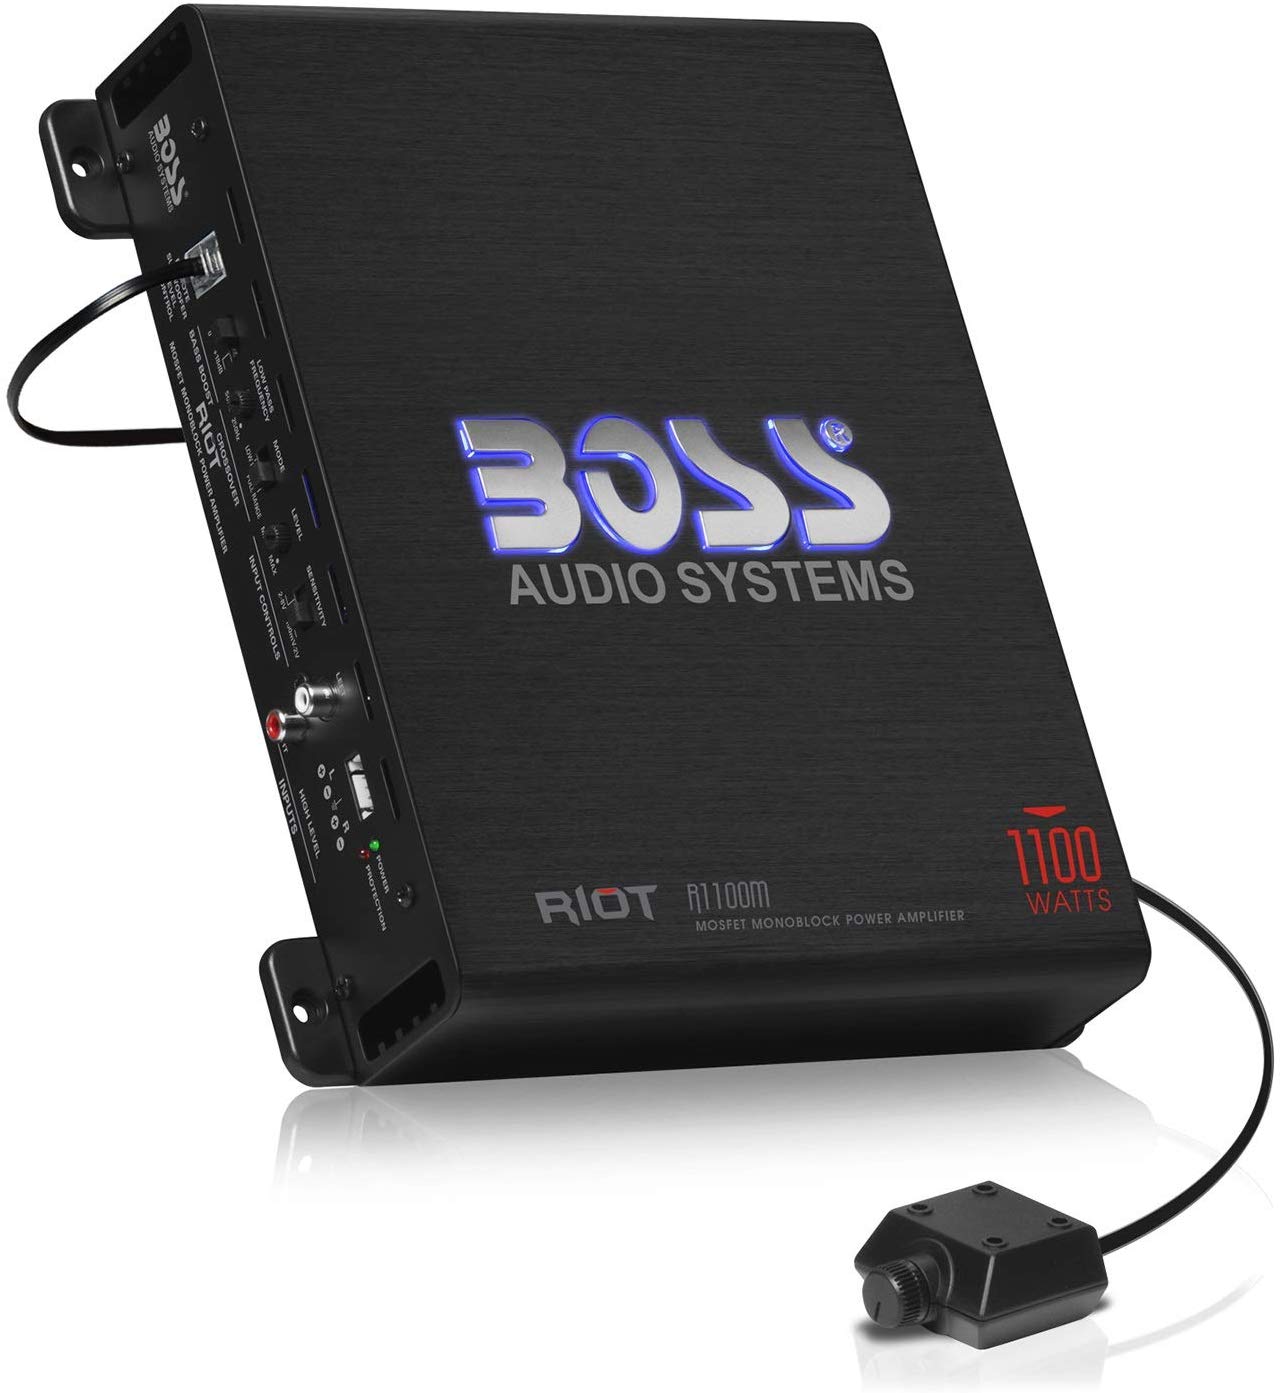 BOSS Audio Systems R1100M Monoblock Car Amplifier - 1100 Watts Max Power, 2/4 Ohm Stable, Class A/B, Mosfet Power Supply, Remote Subwoofer Control